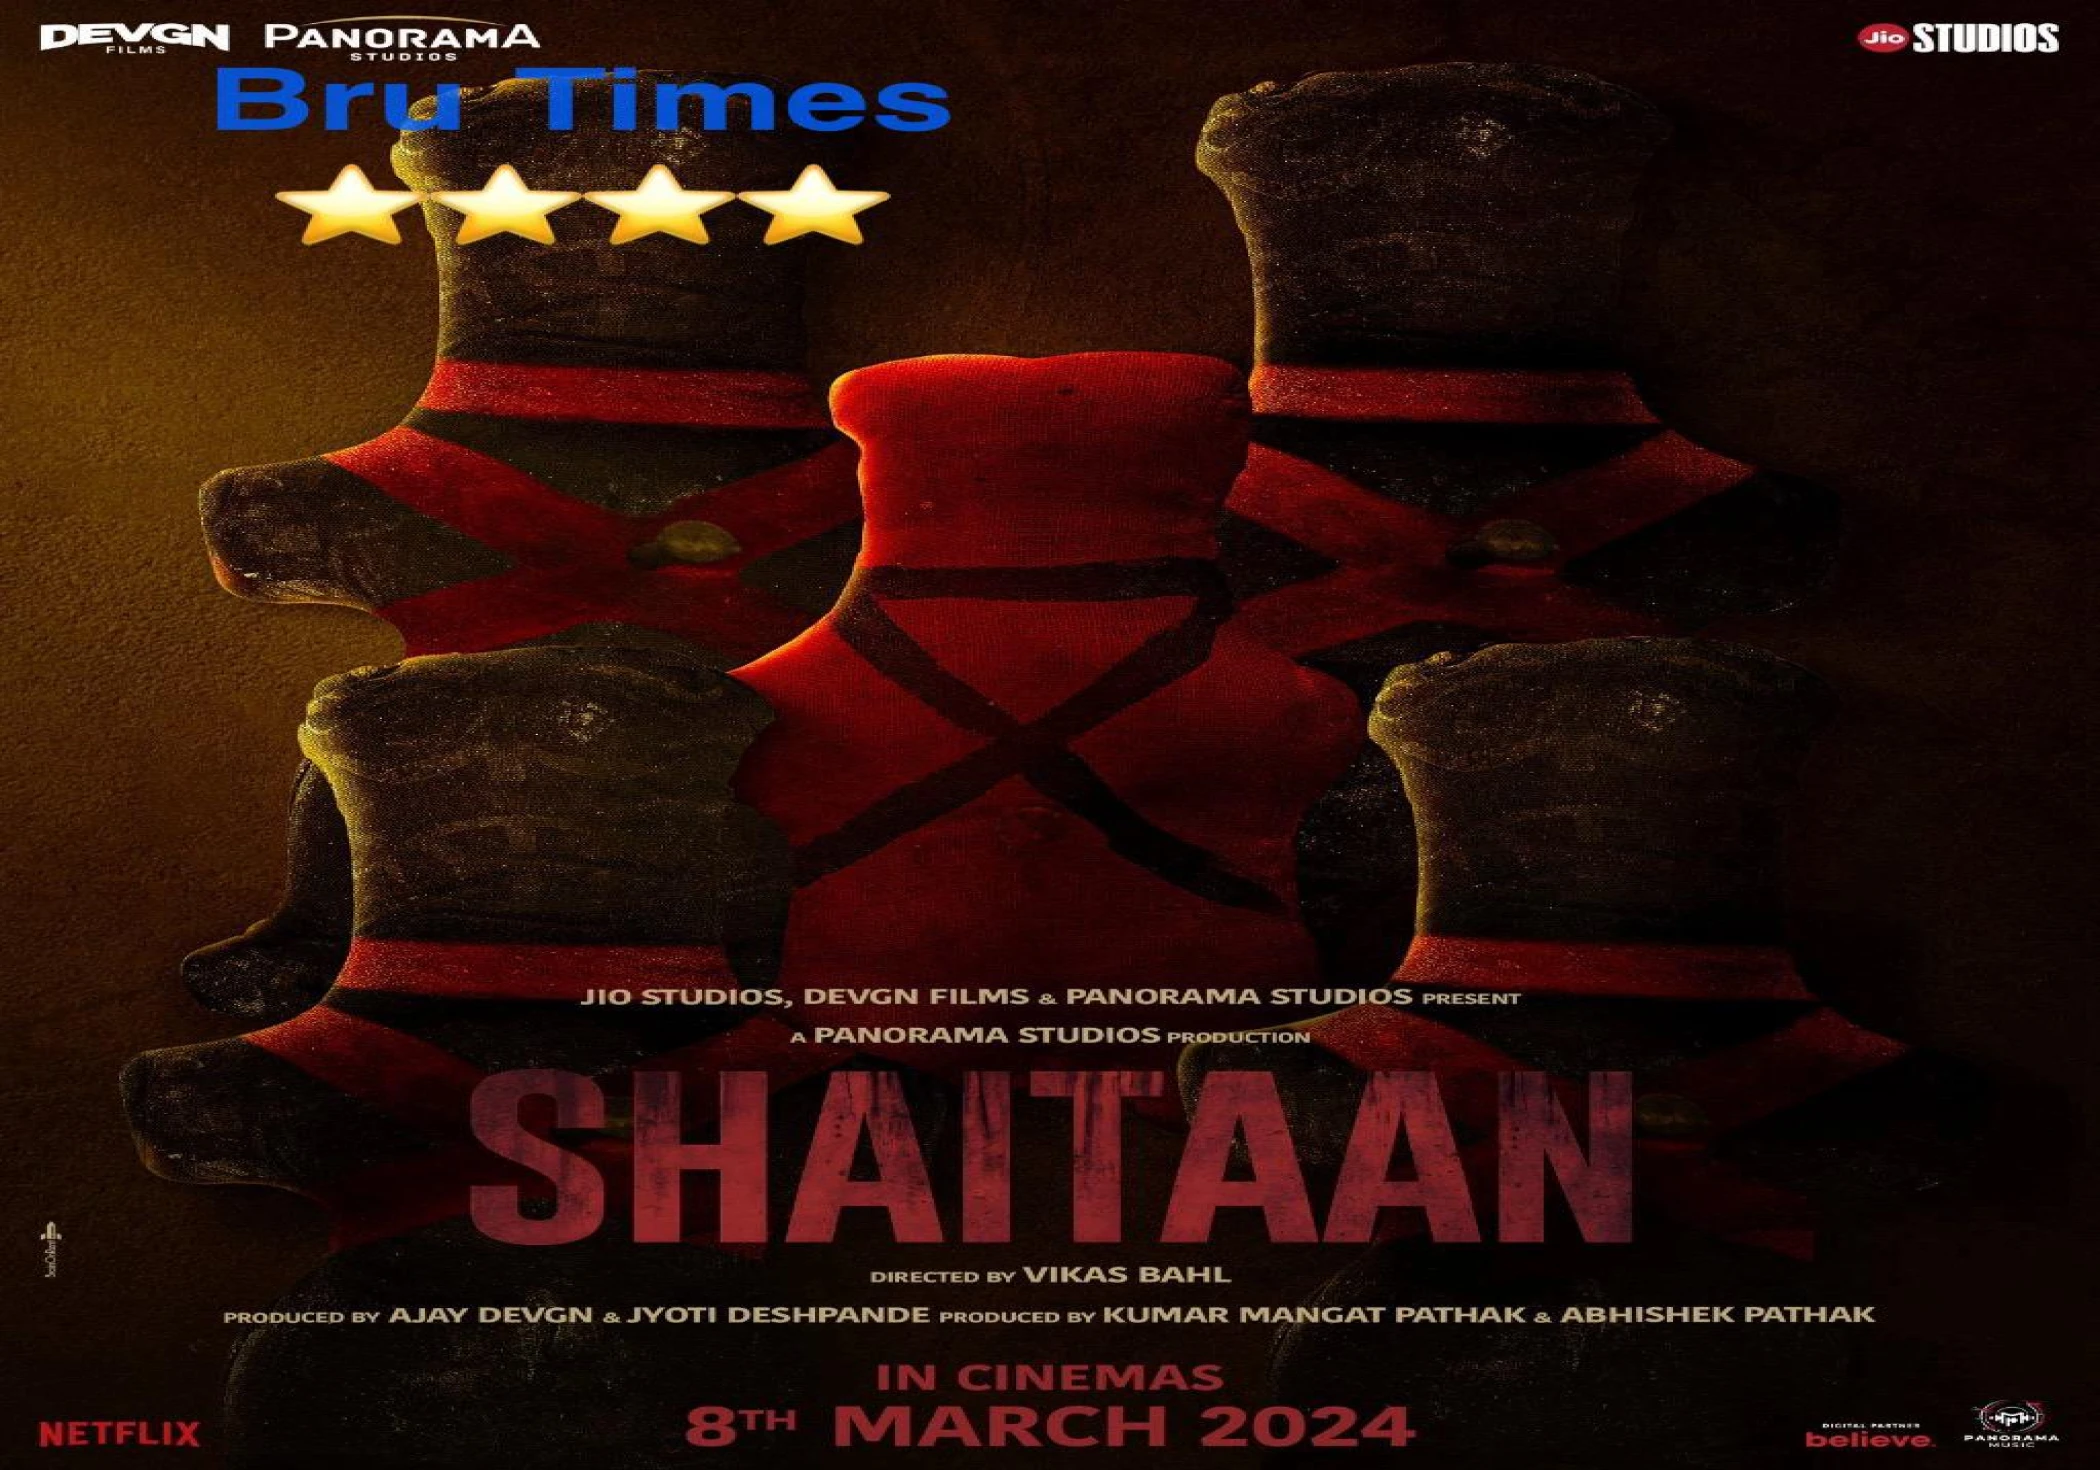 Shaitaan Movie Review : Unleashes Supernatural Brilliance, A Cinematic Triumph with R Madhavan's Shine, Top-Notch Twists, and Musical Splendor ⭐⭐⭐⭐